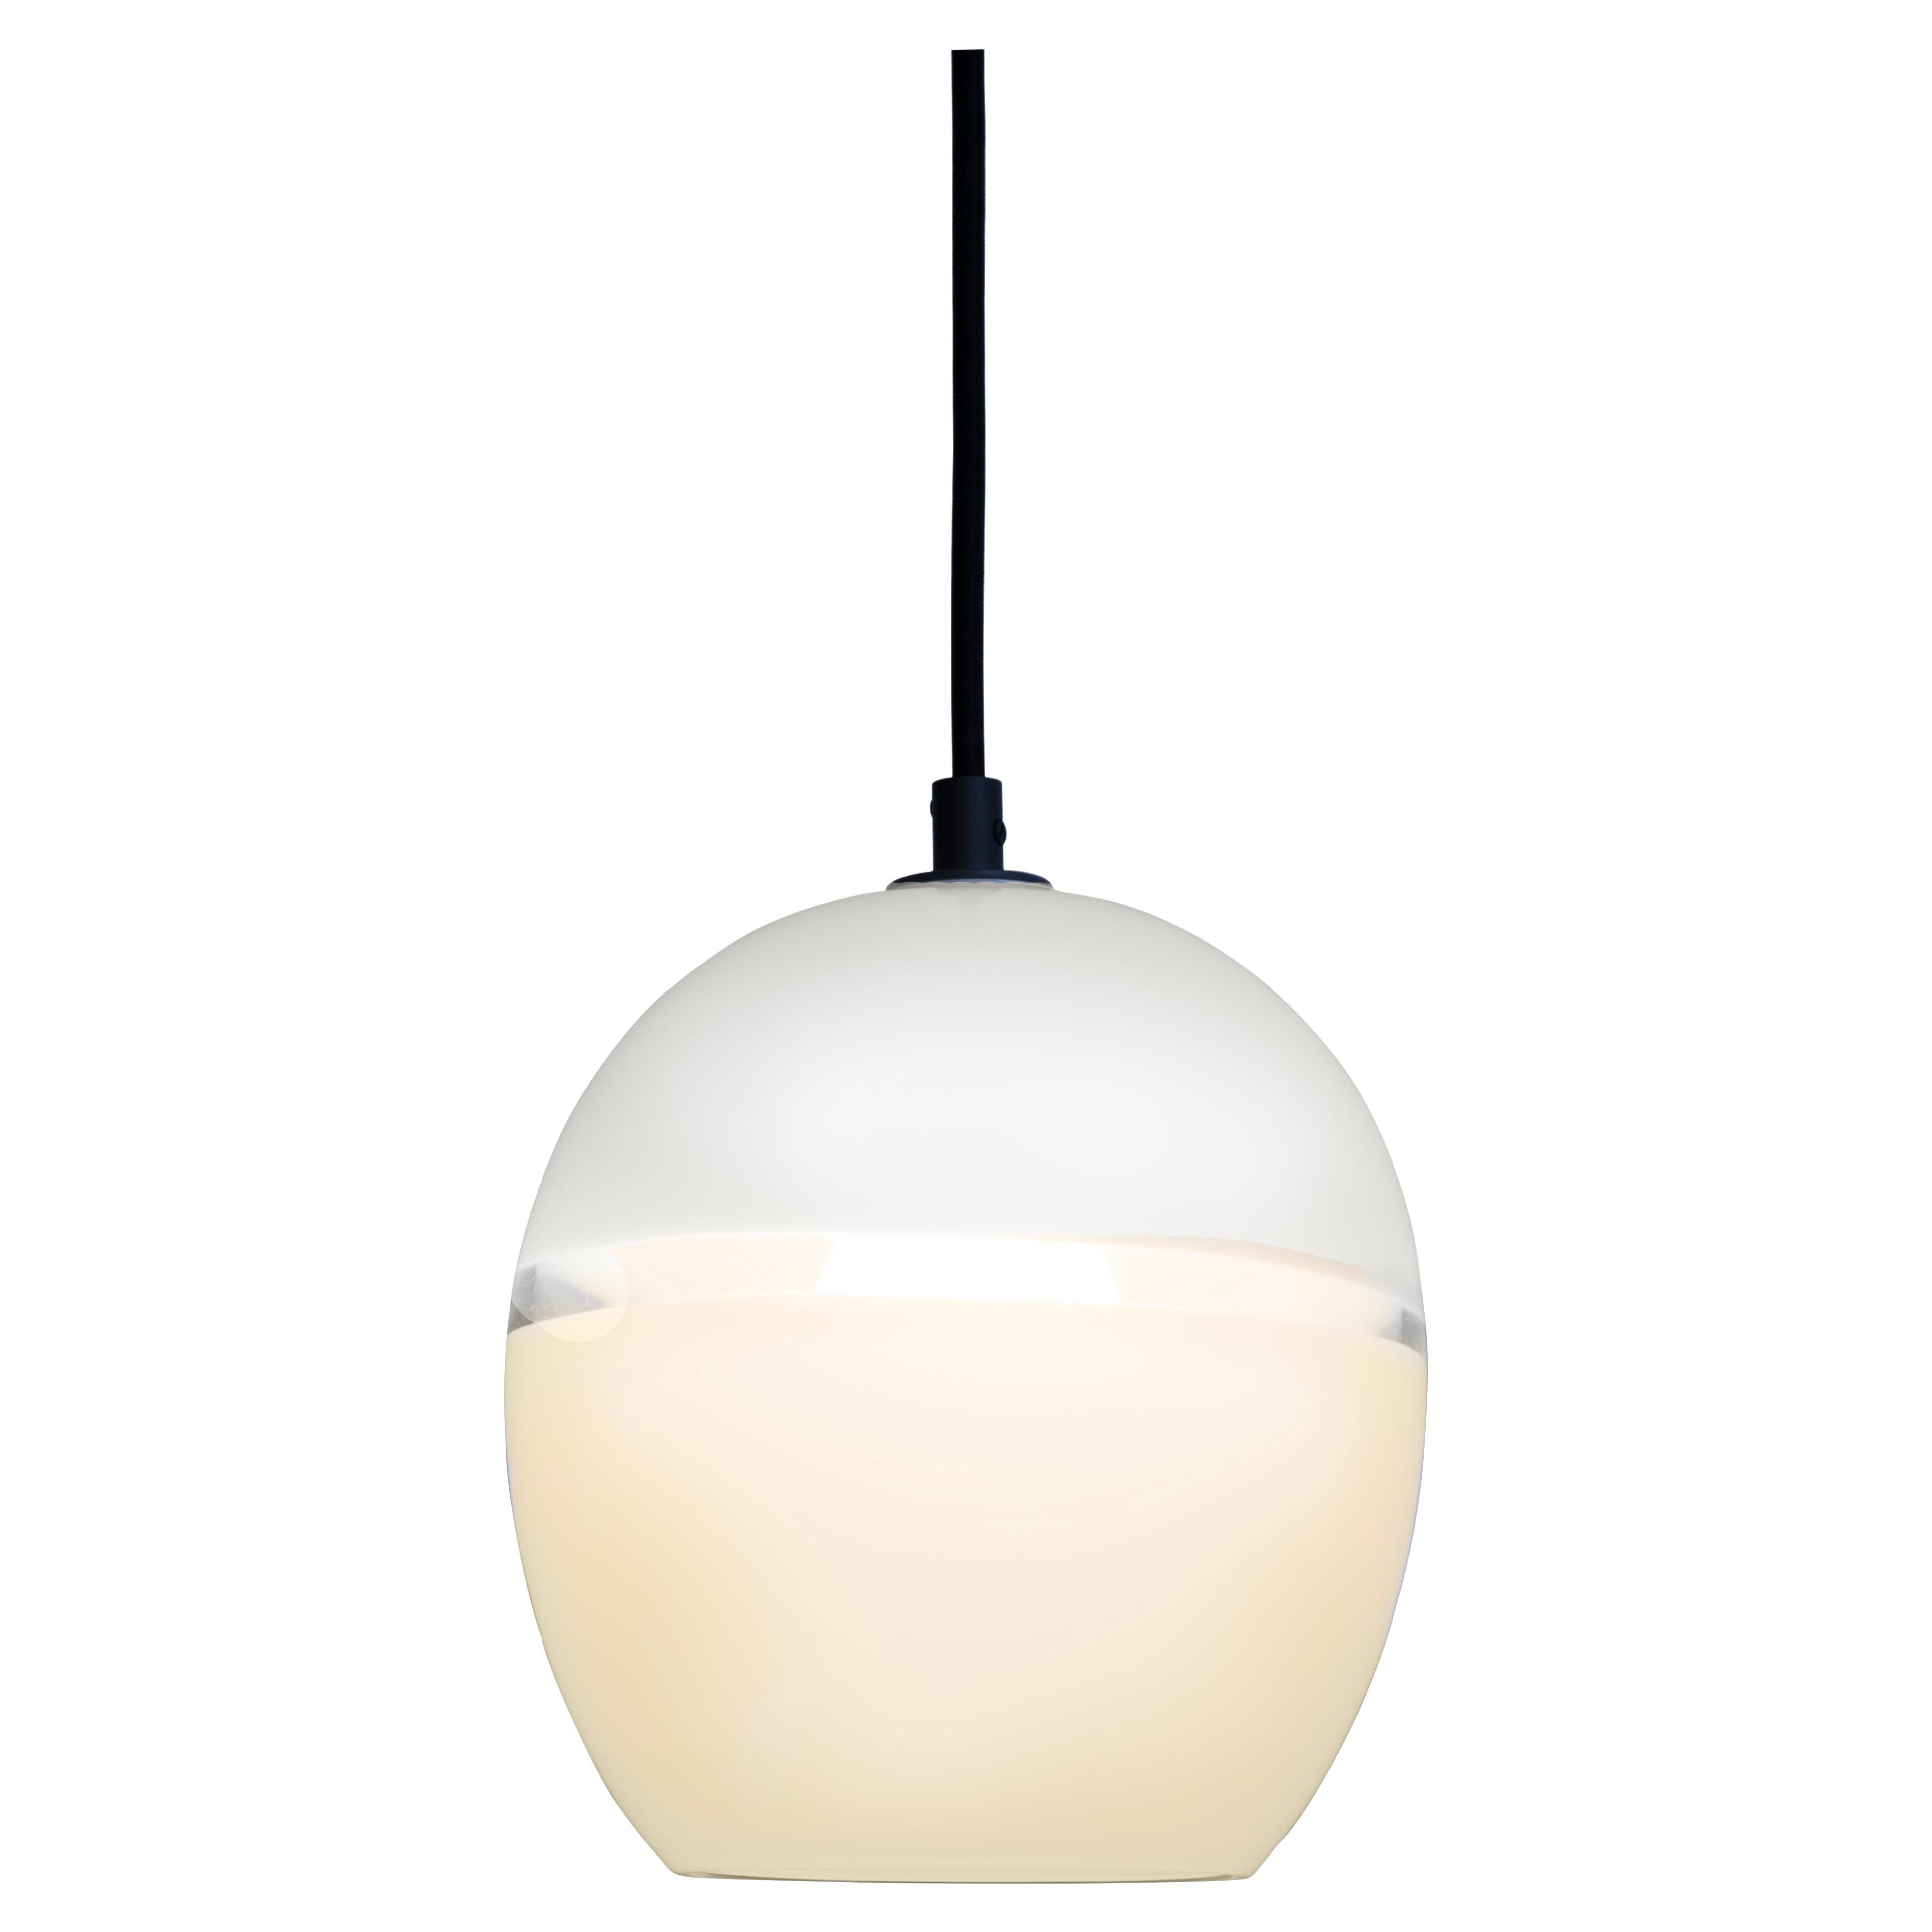 Lattimo Large Barrel Pendant Light, Hand Blown Glass - Made to Order For Sale